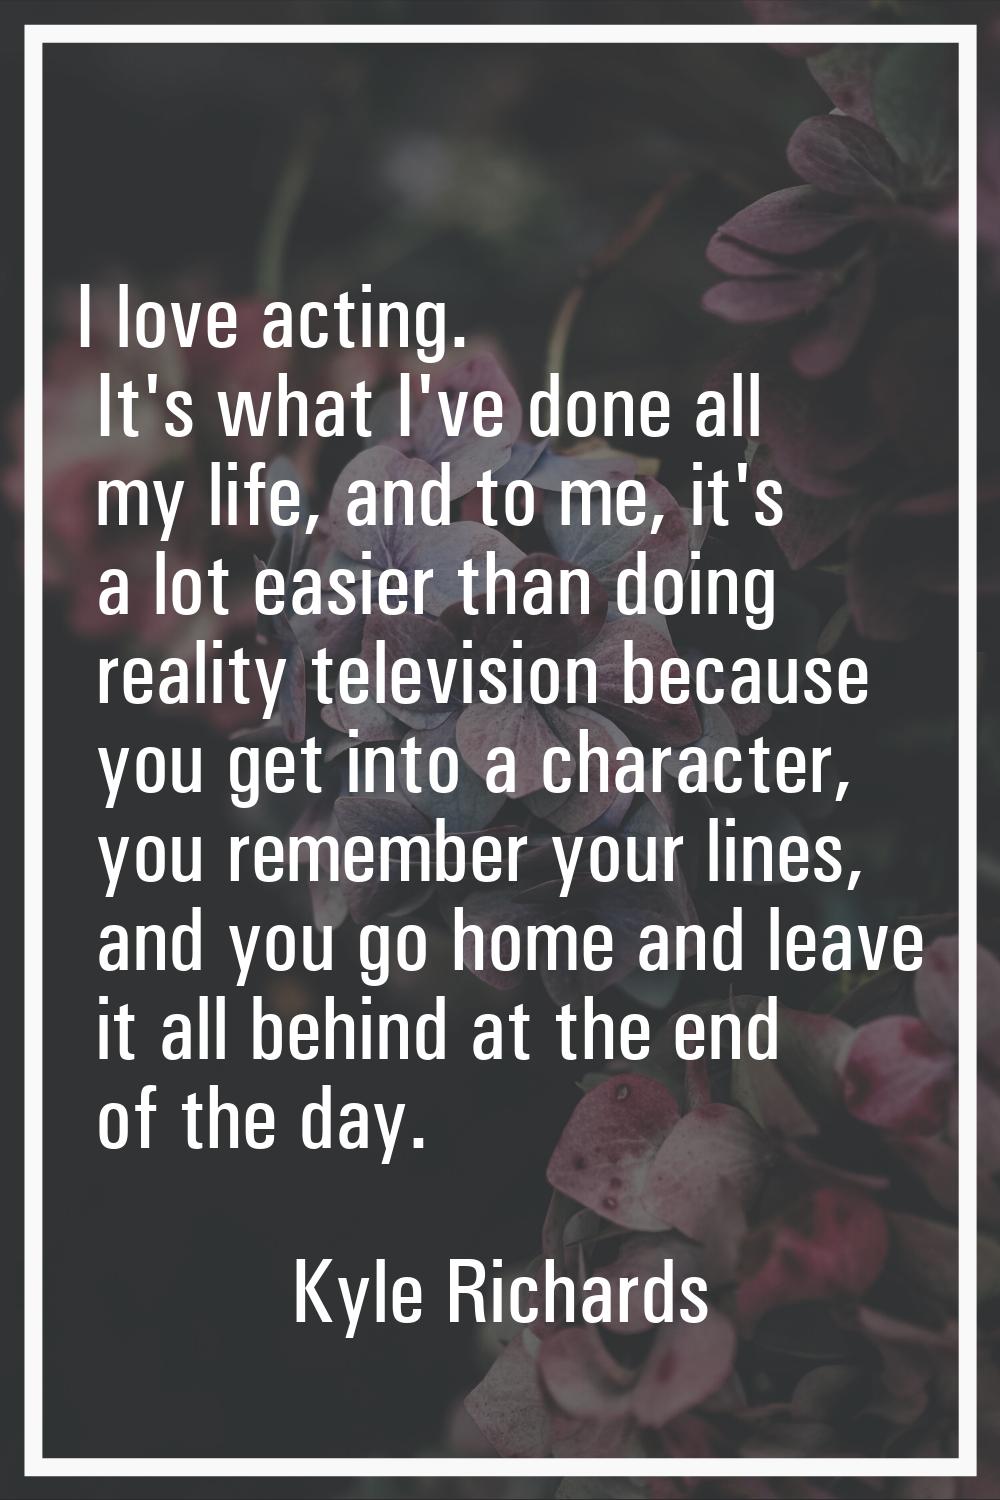 I love acting. It's what I've done all my life, and to me, it's a lot easier than doing reality tel